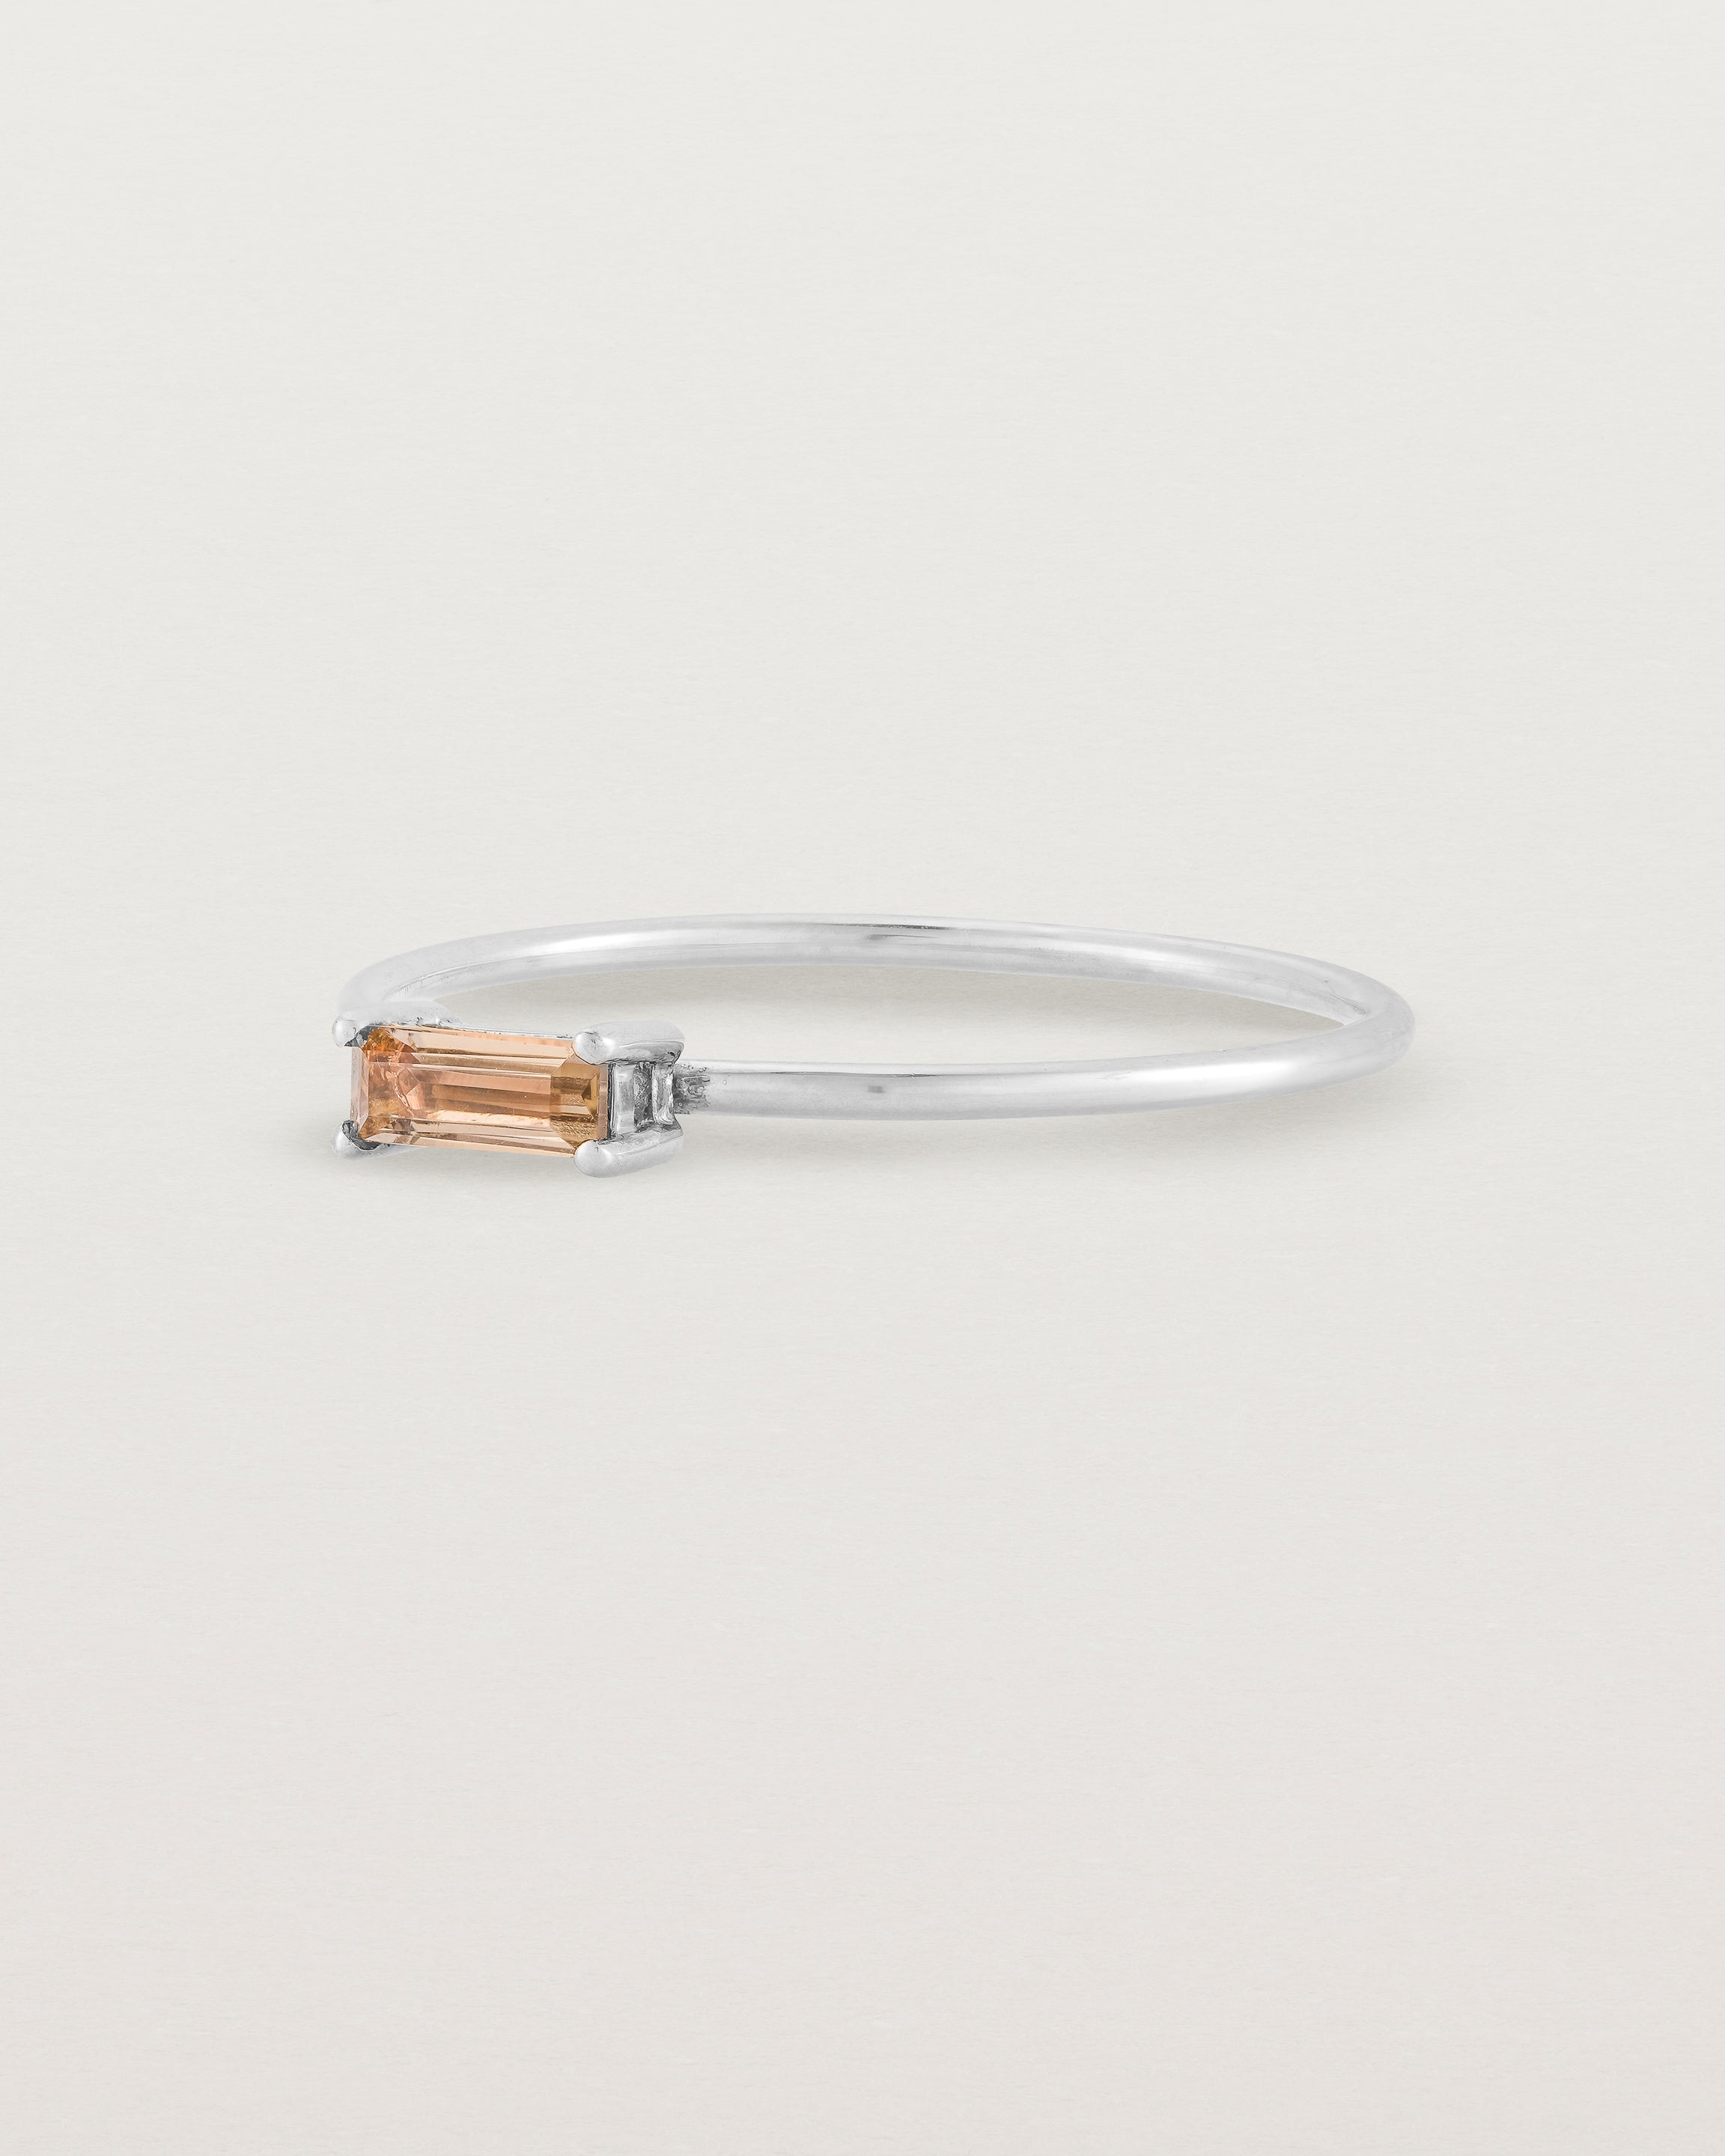 Angled view of the Horizontal Baguette Ring | Smokey Quartz in Sterling Silver.